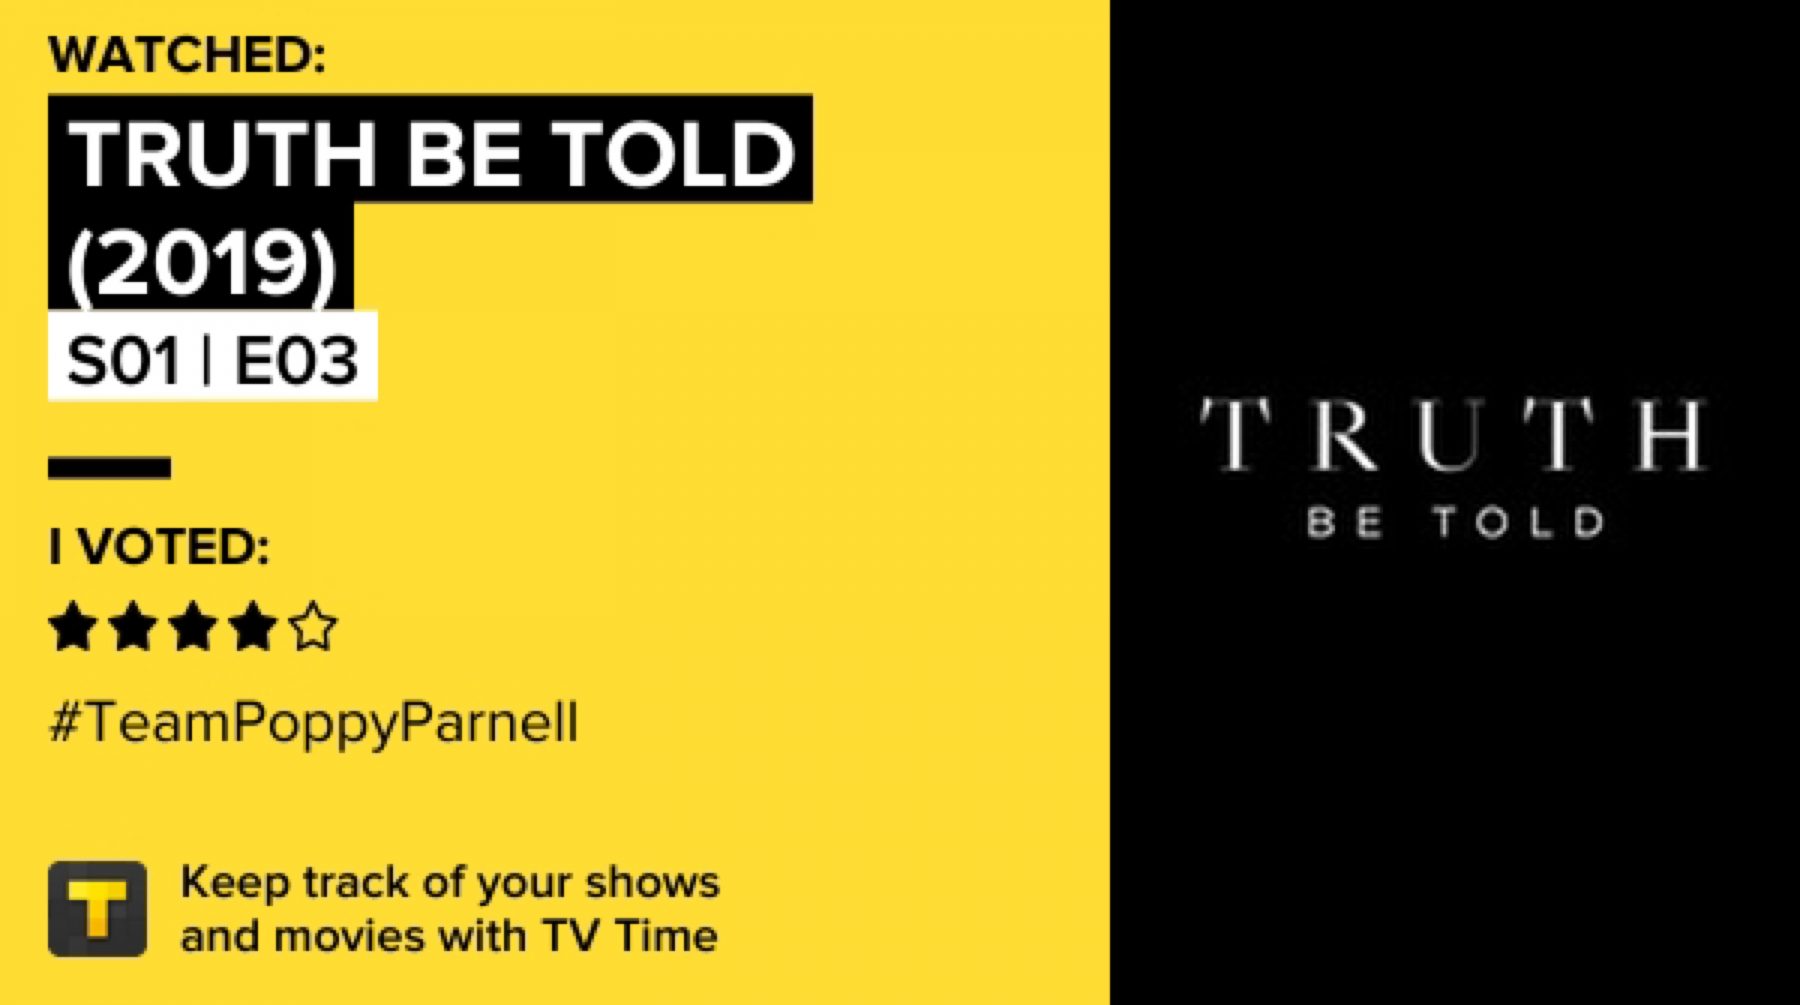 Watched Truth Be Told (2019) Season 1 Episode 3: "Even Salt Looks Like Sugar"